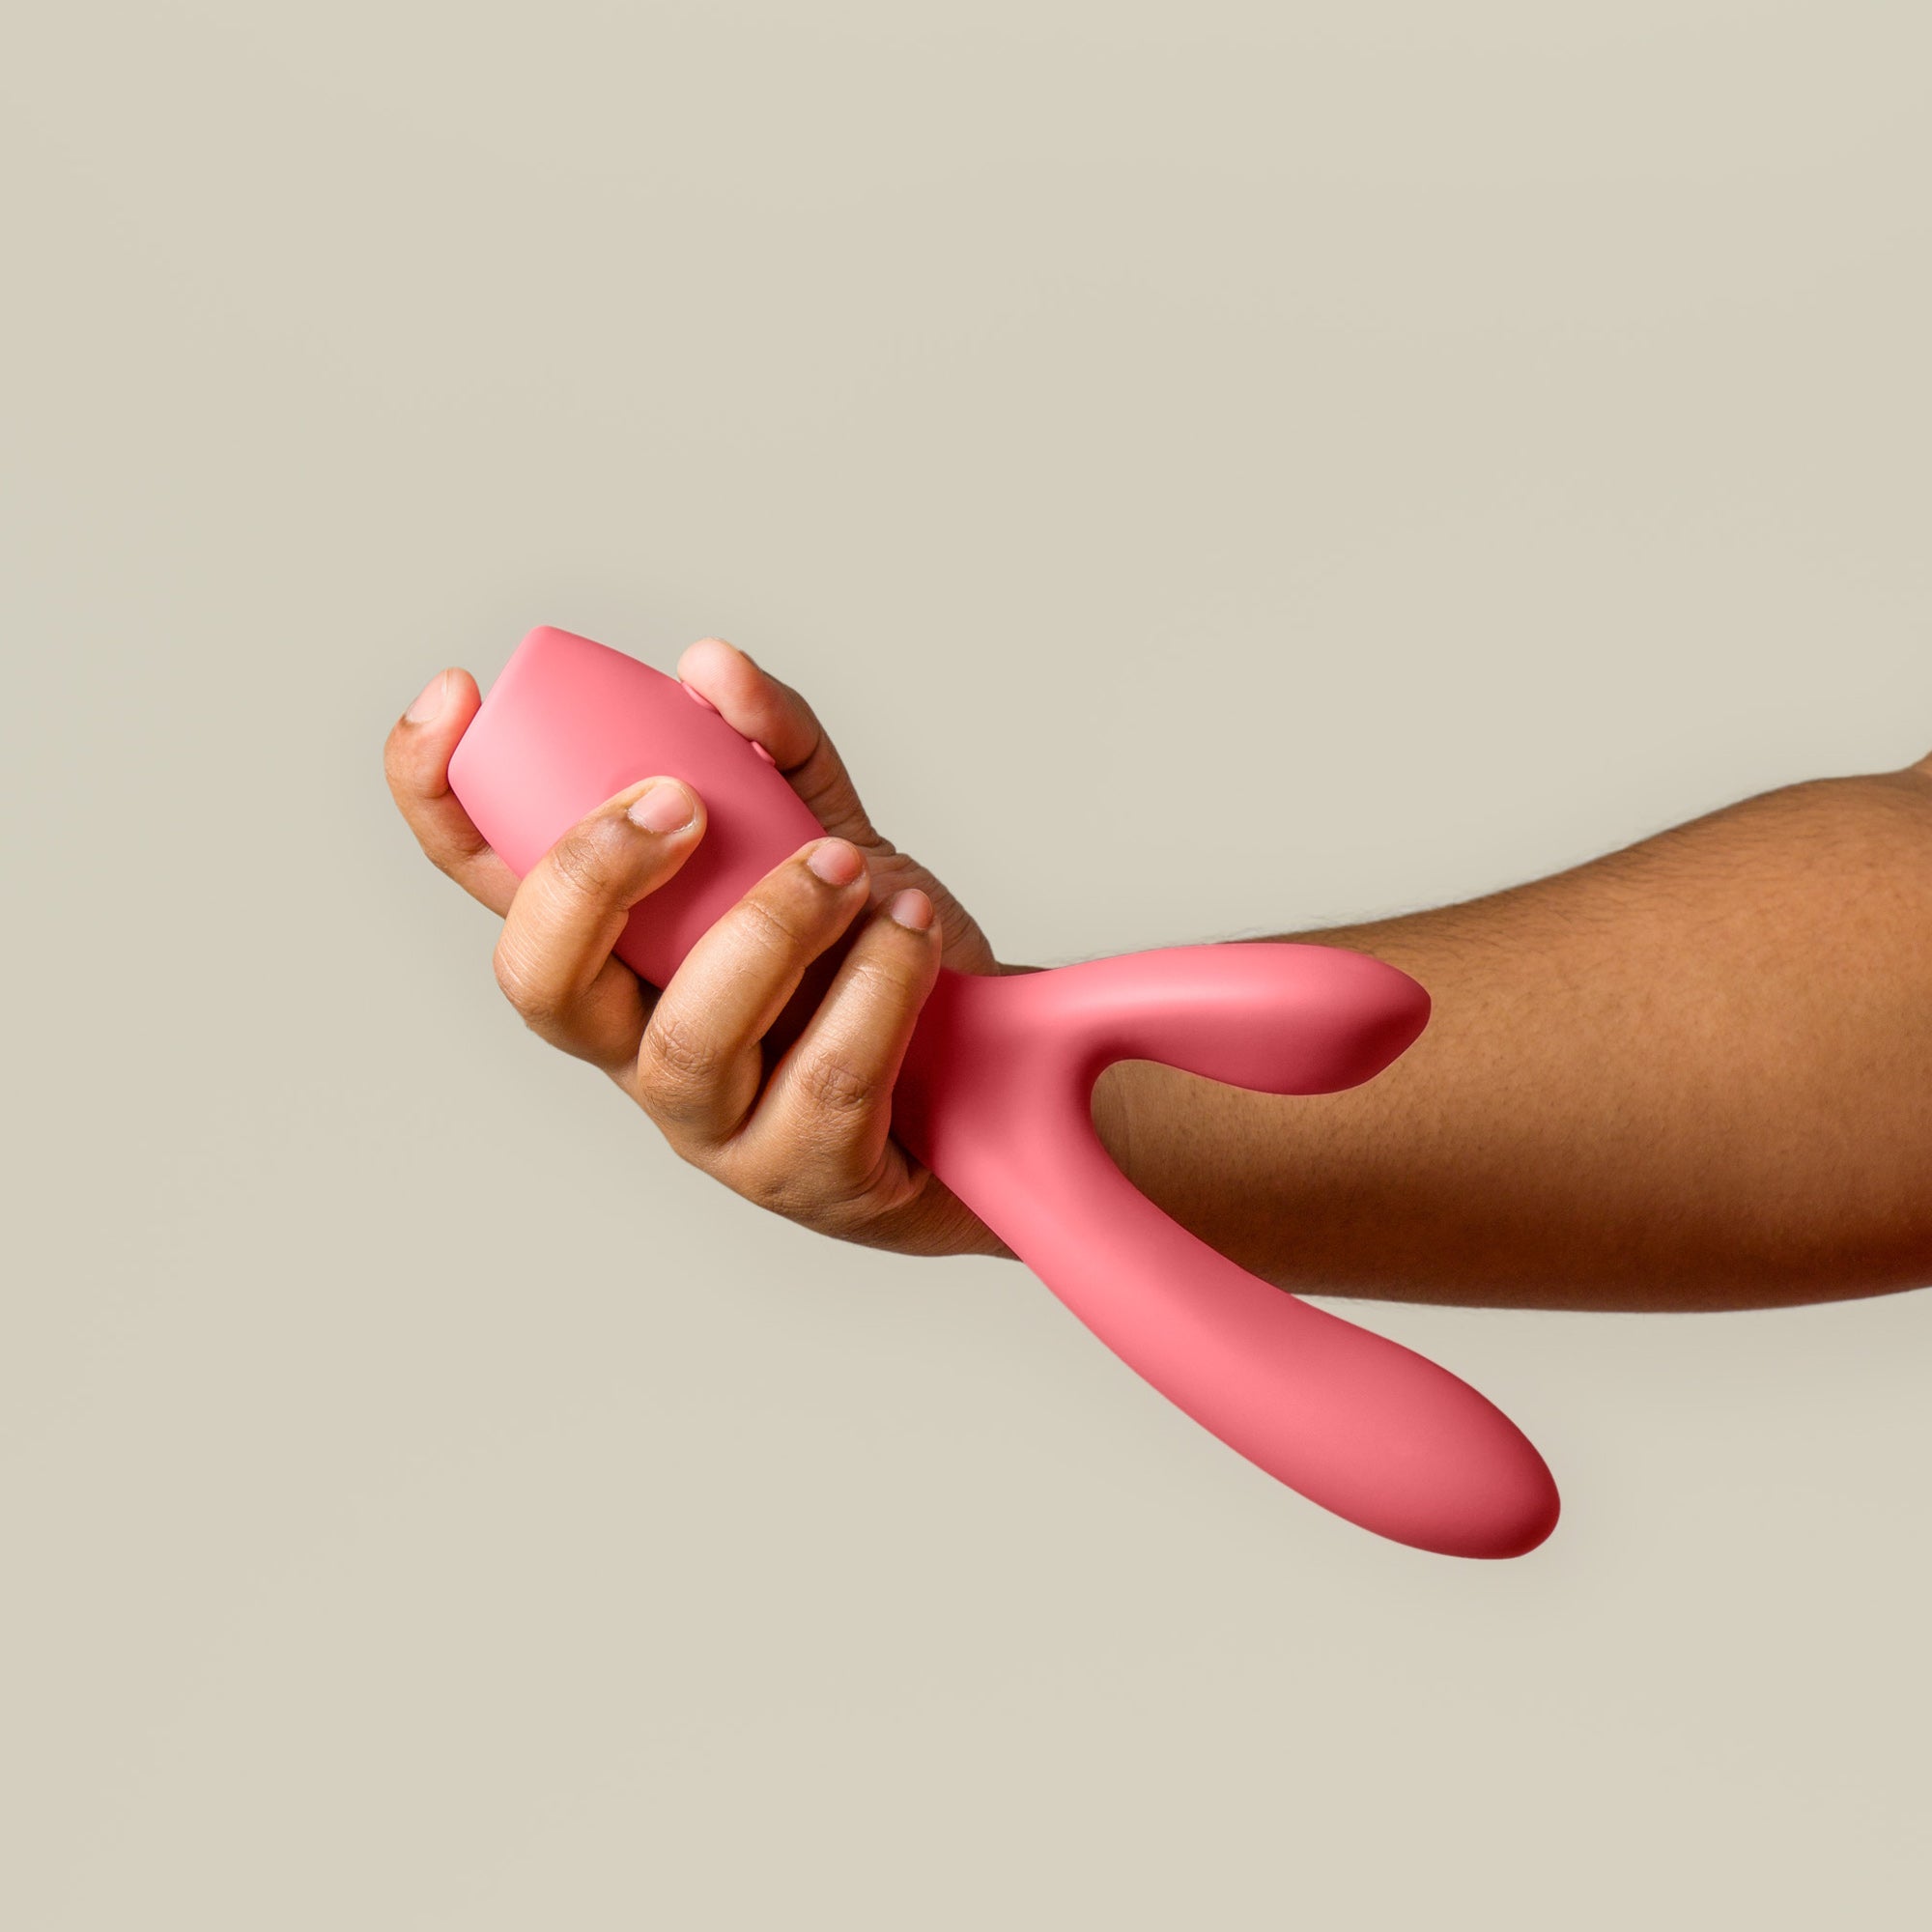 Artist Vibrator Dual Smile Period The -Stimulating The – Makers